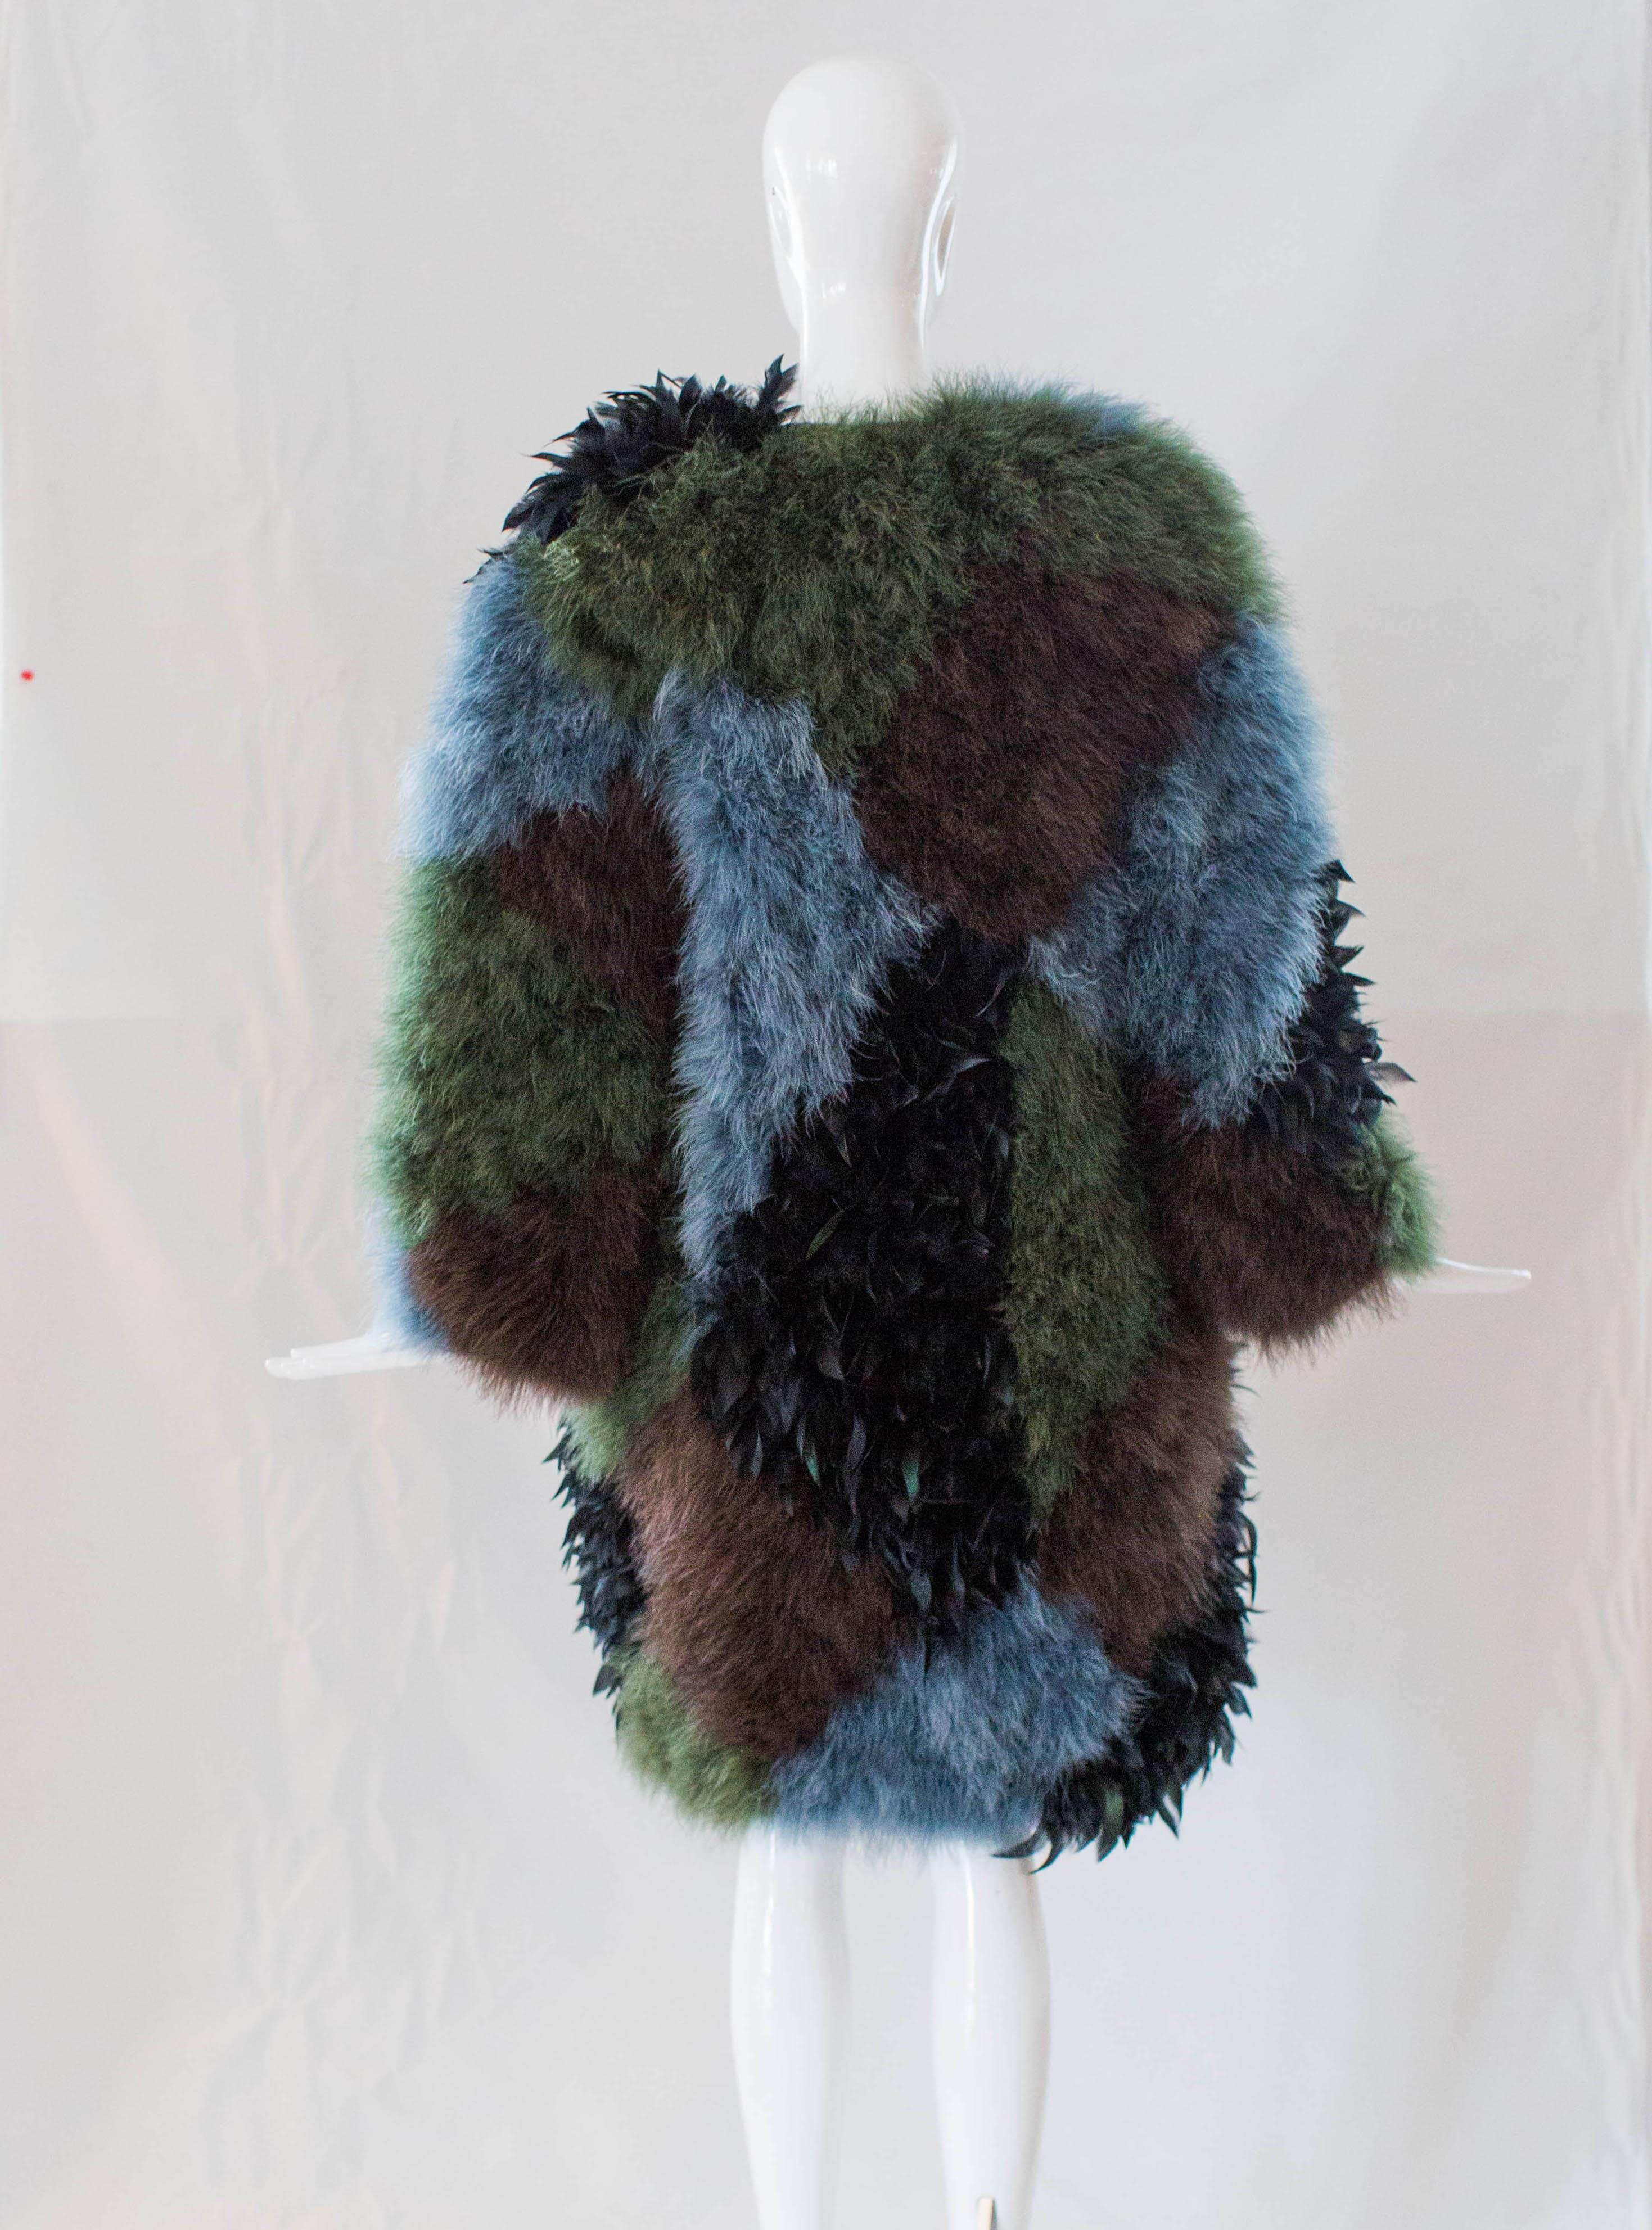 This fabulous Marabou Feather Coat is dotted with black, blue, gray and green feathers. Lined with brown silk and finished with black buttons at the front, this coat will keep you stylishly warm this winter! 
Length: 41” 
Chest: 38” 
Sweep: 40” 